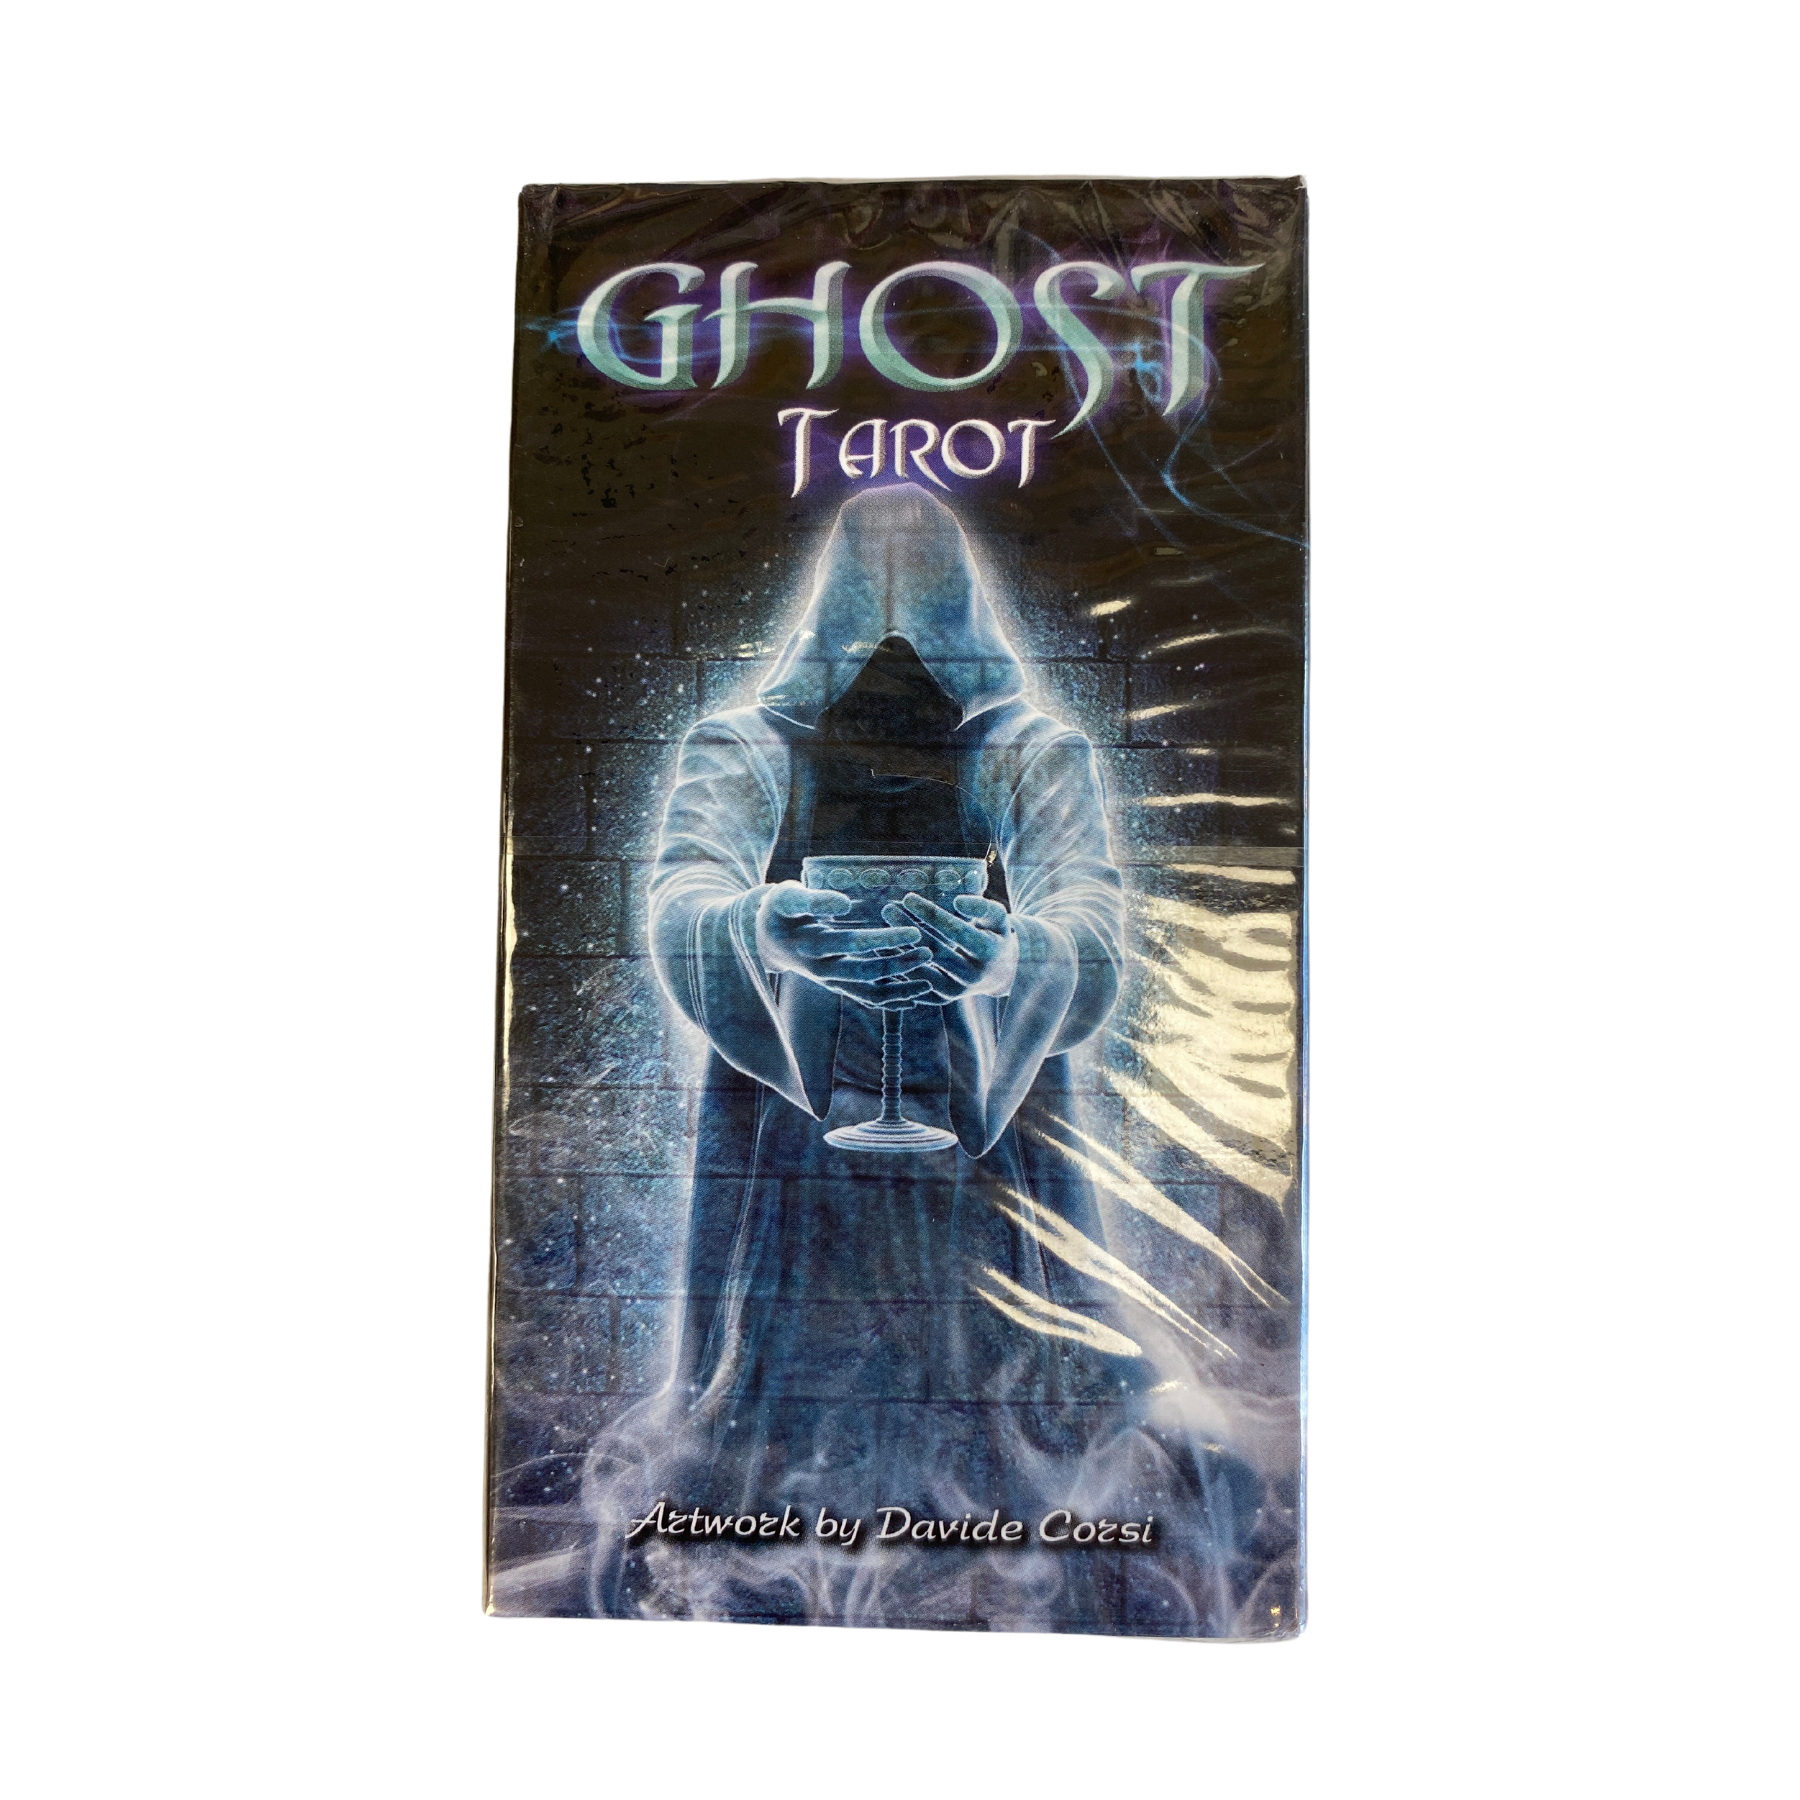 Ghost Tarot deck back cover